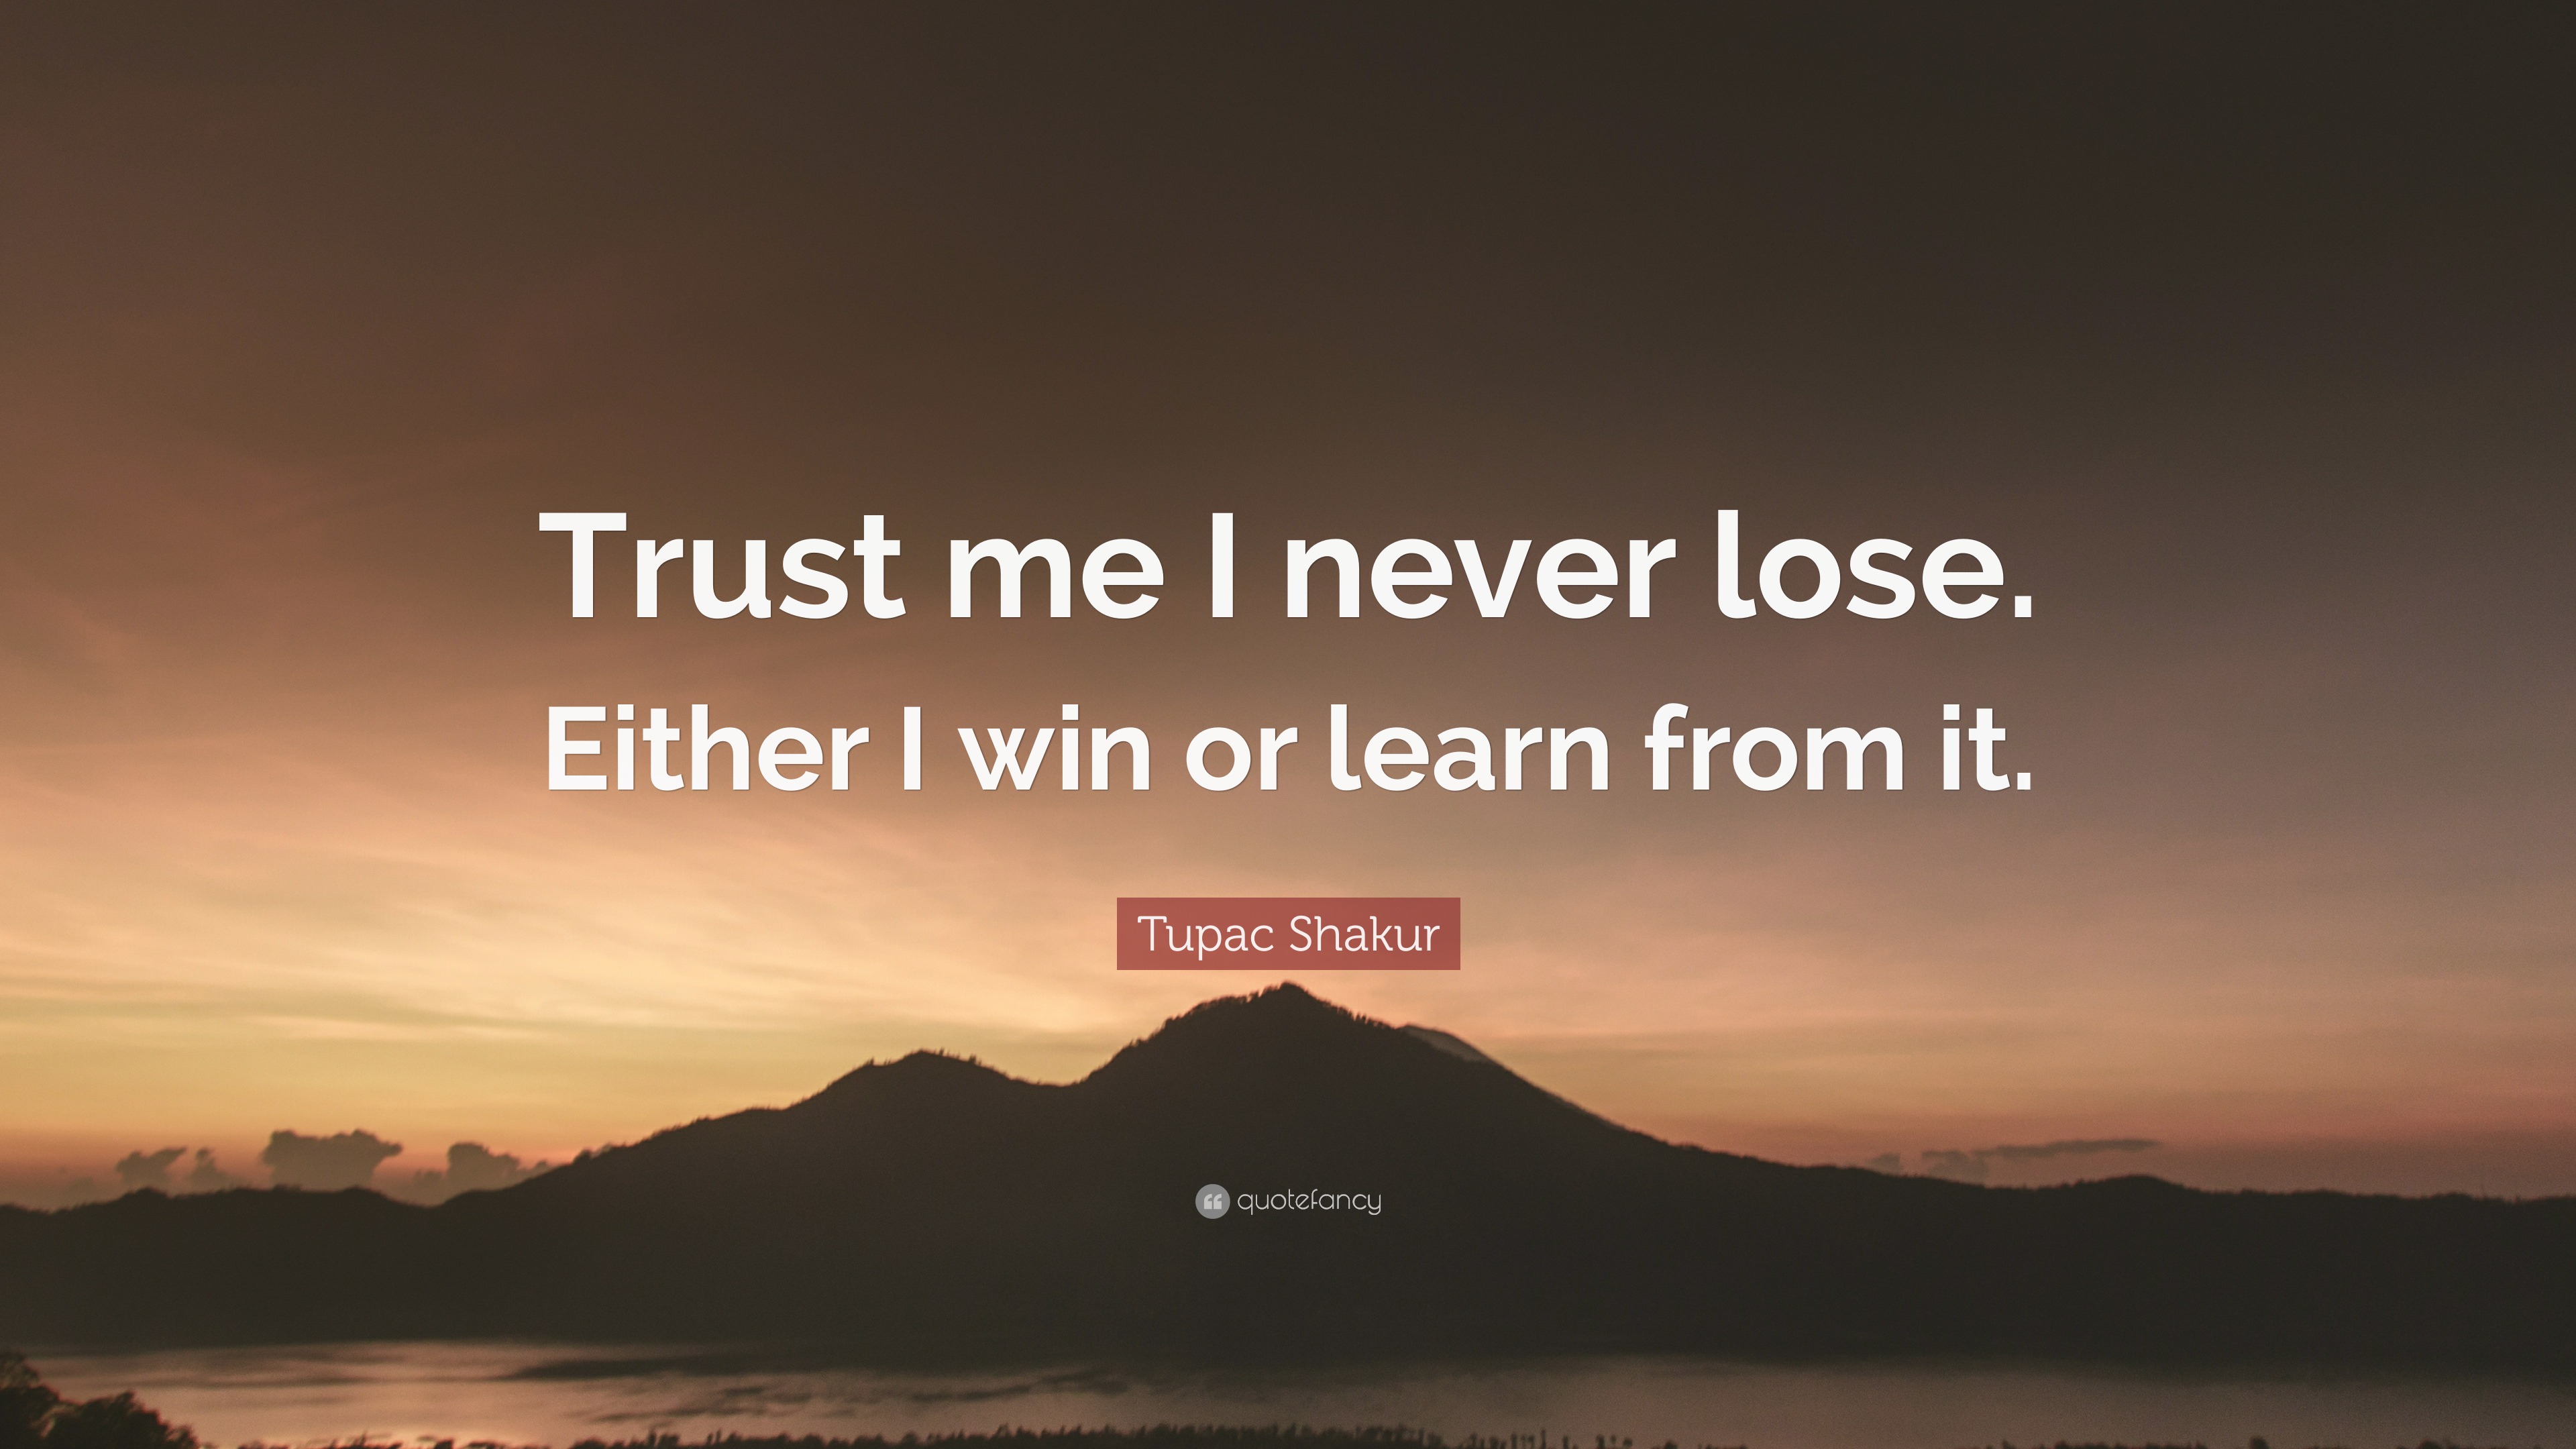 Tupac Shakur Quote: "Trust me I never lose. Either I win or learn from it."